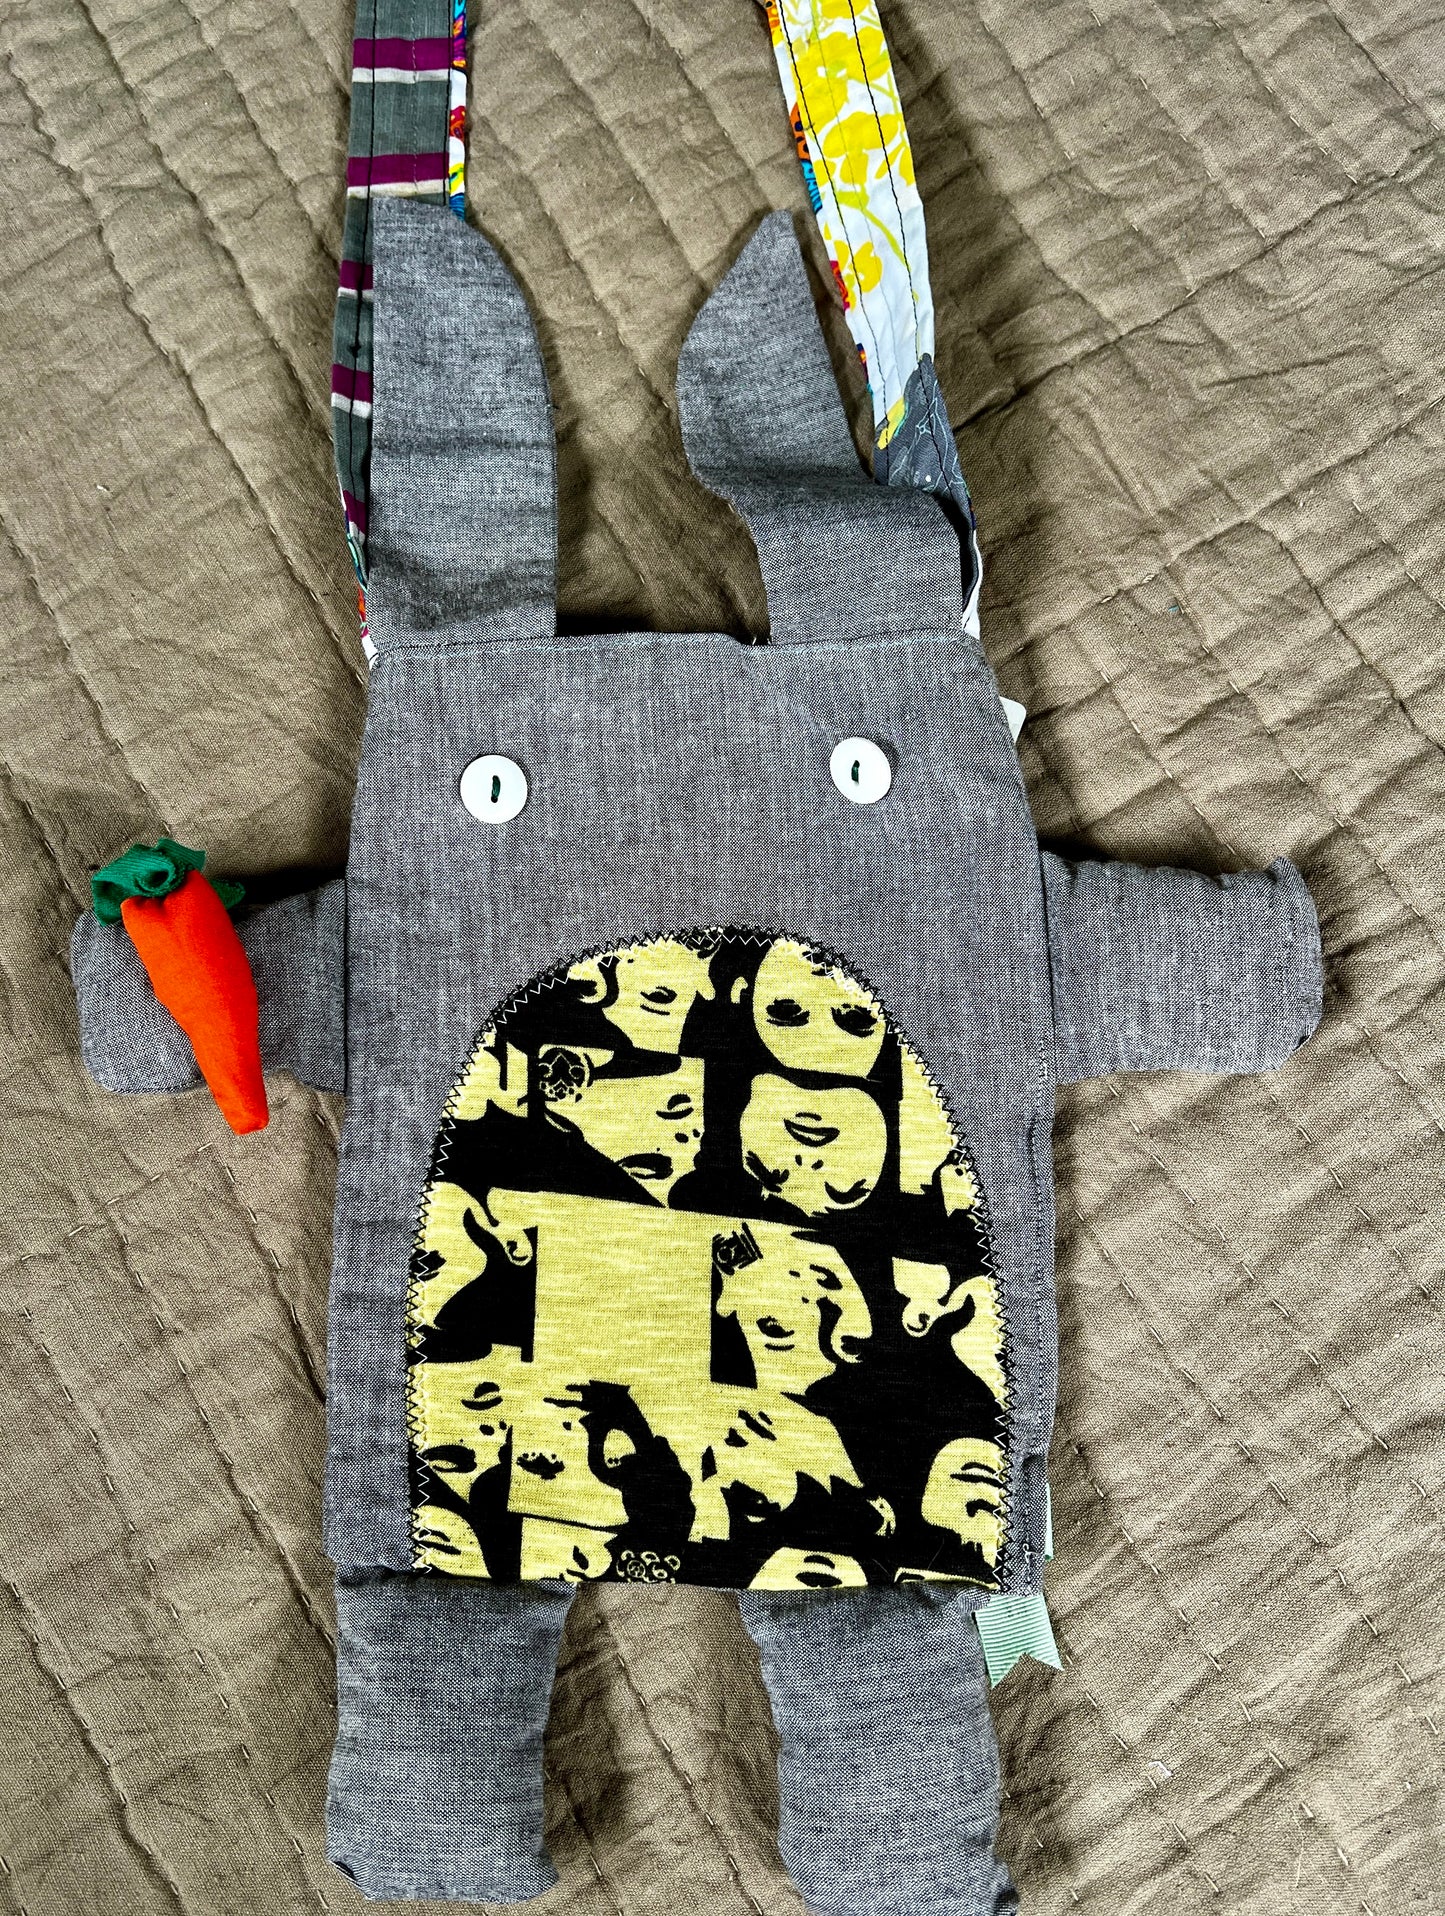 Tote Bag - Bunny Animal Friend - Small Satchel or Large Tote